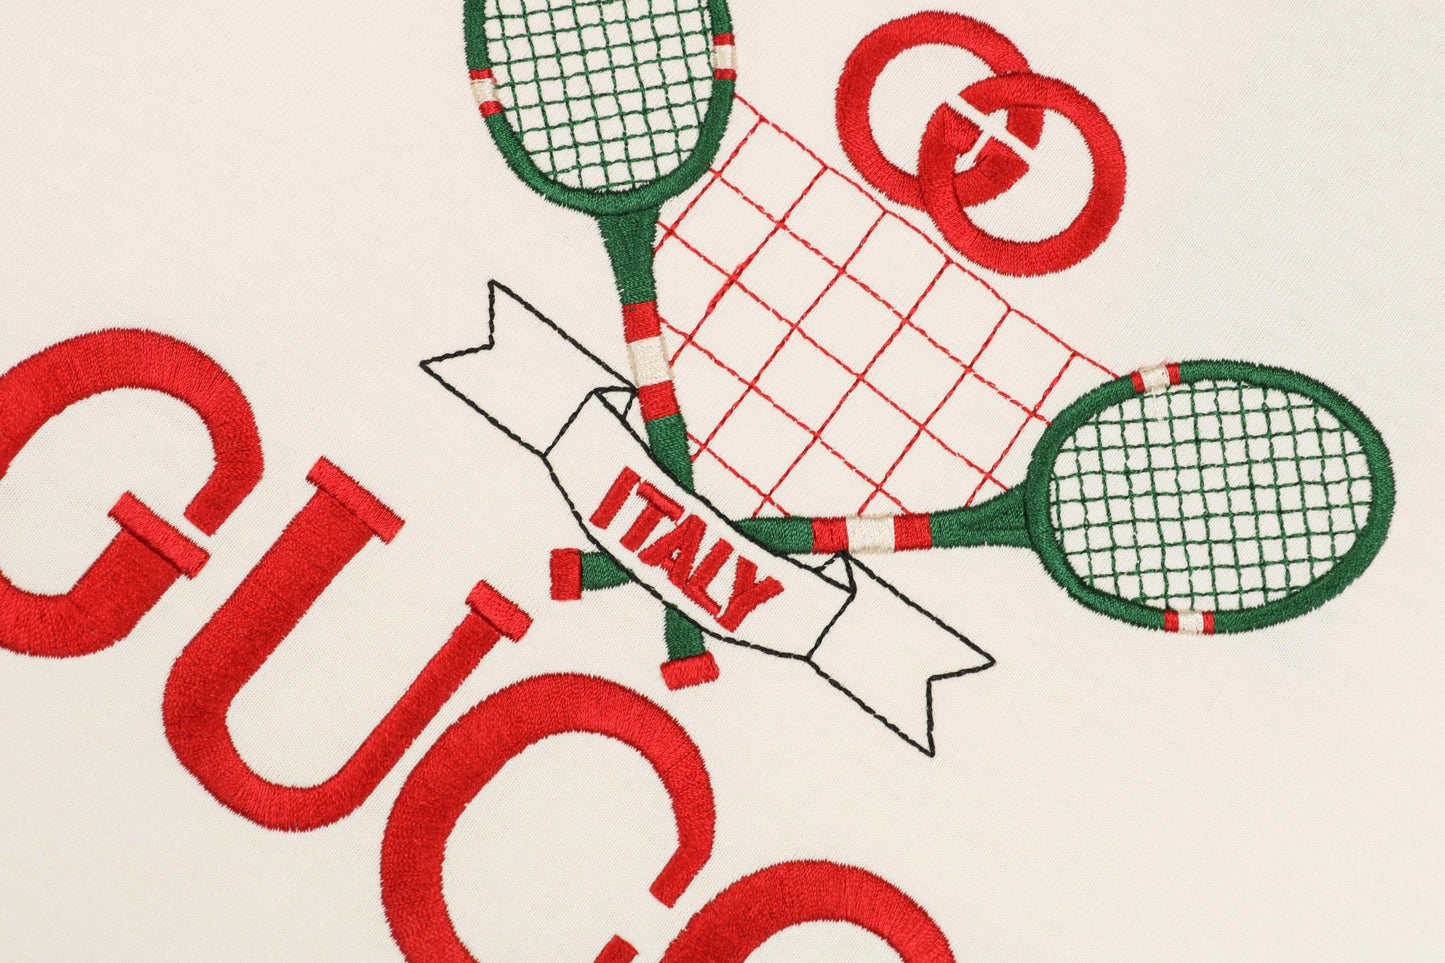 Gucc1 Tennis Embroidered T-Shirt